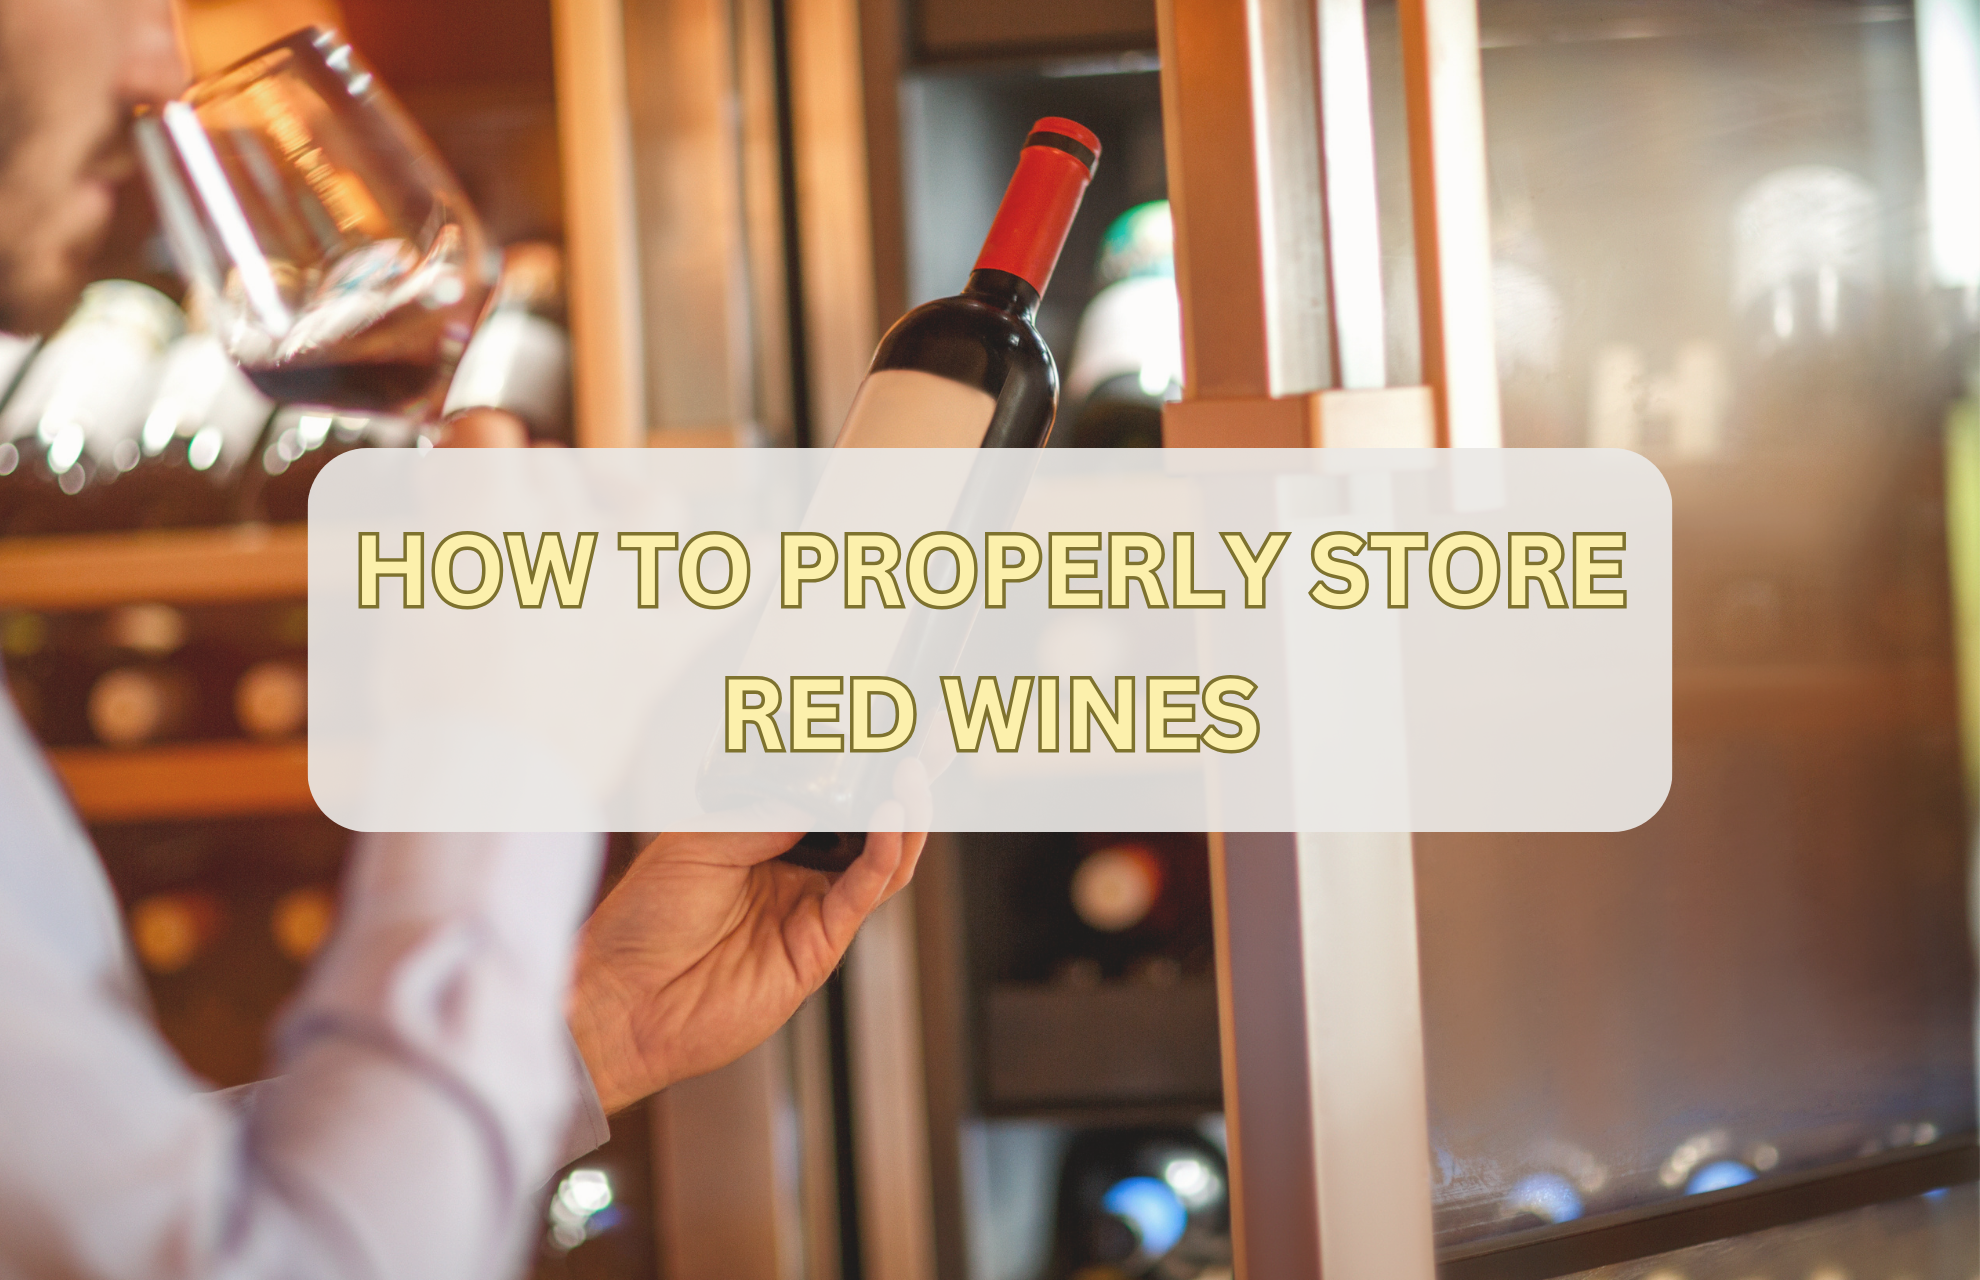 HOW TO PROPERLY STORE RED WINES